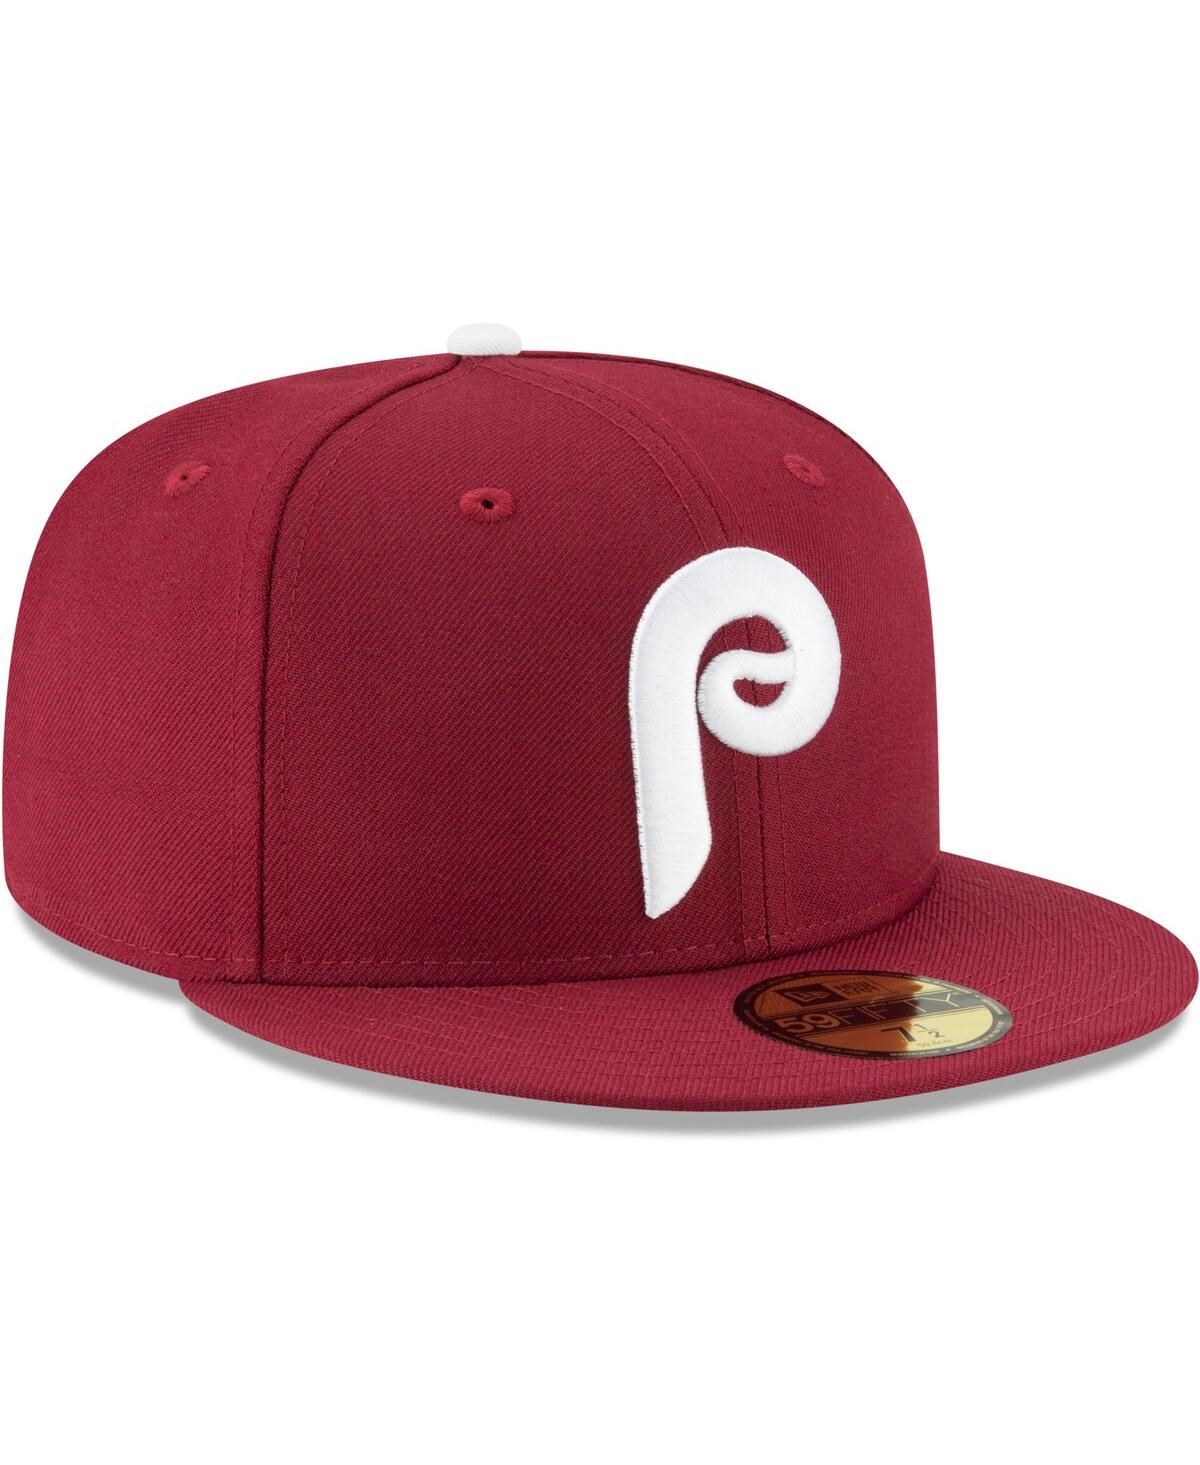 Shop New Era Men's  Maroon Philadelphia Phillies Cooperstown Collection Wool 59fifty Fitted Hat